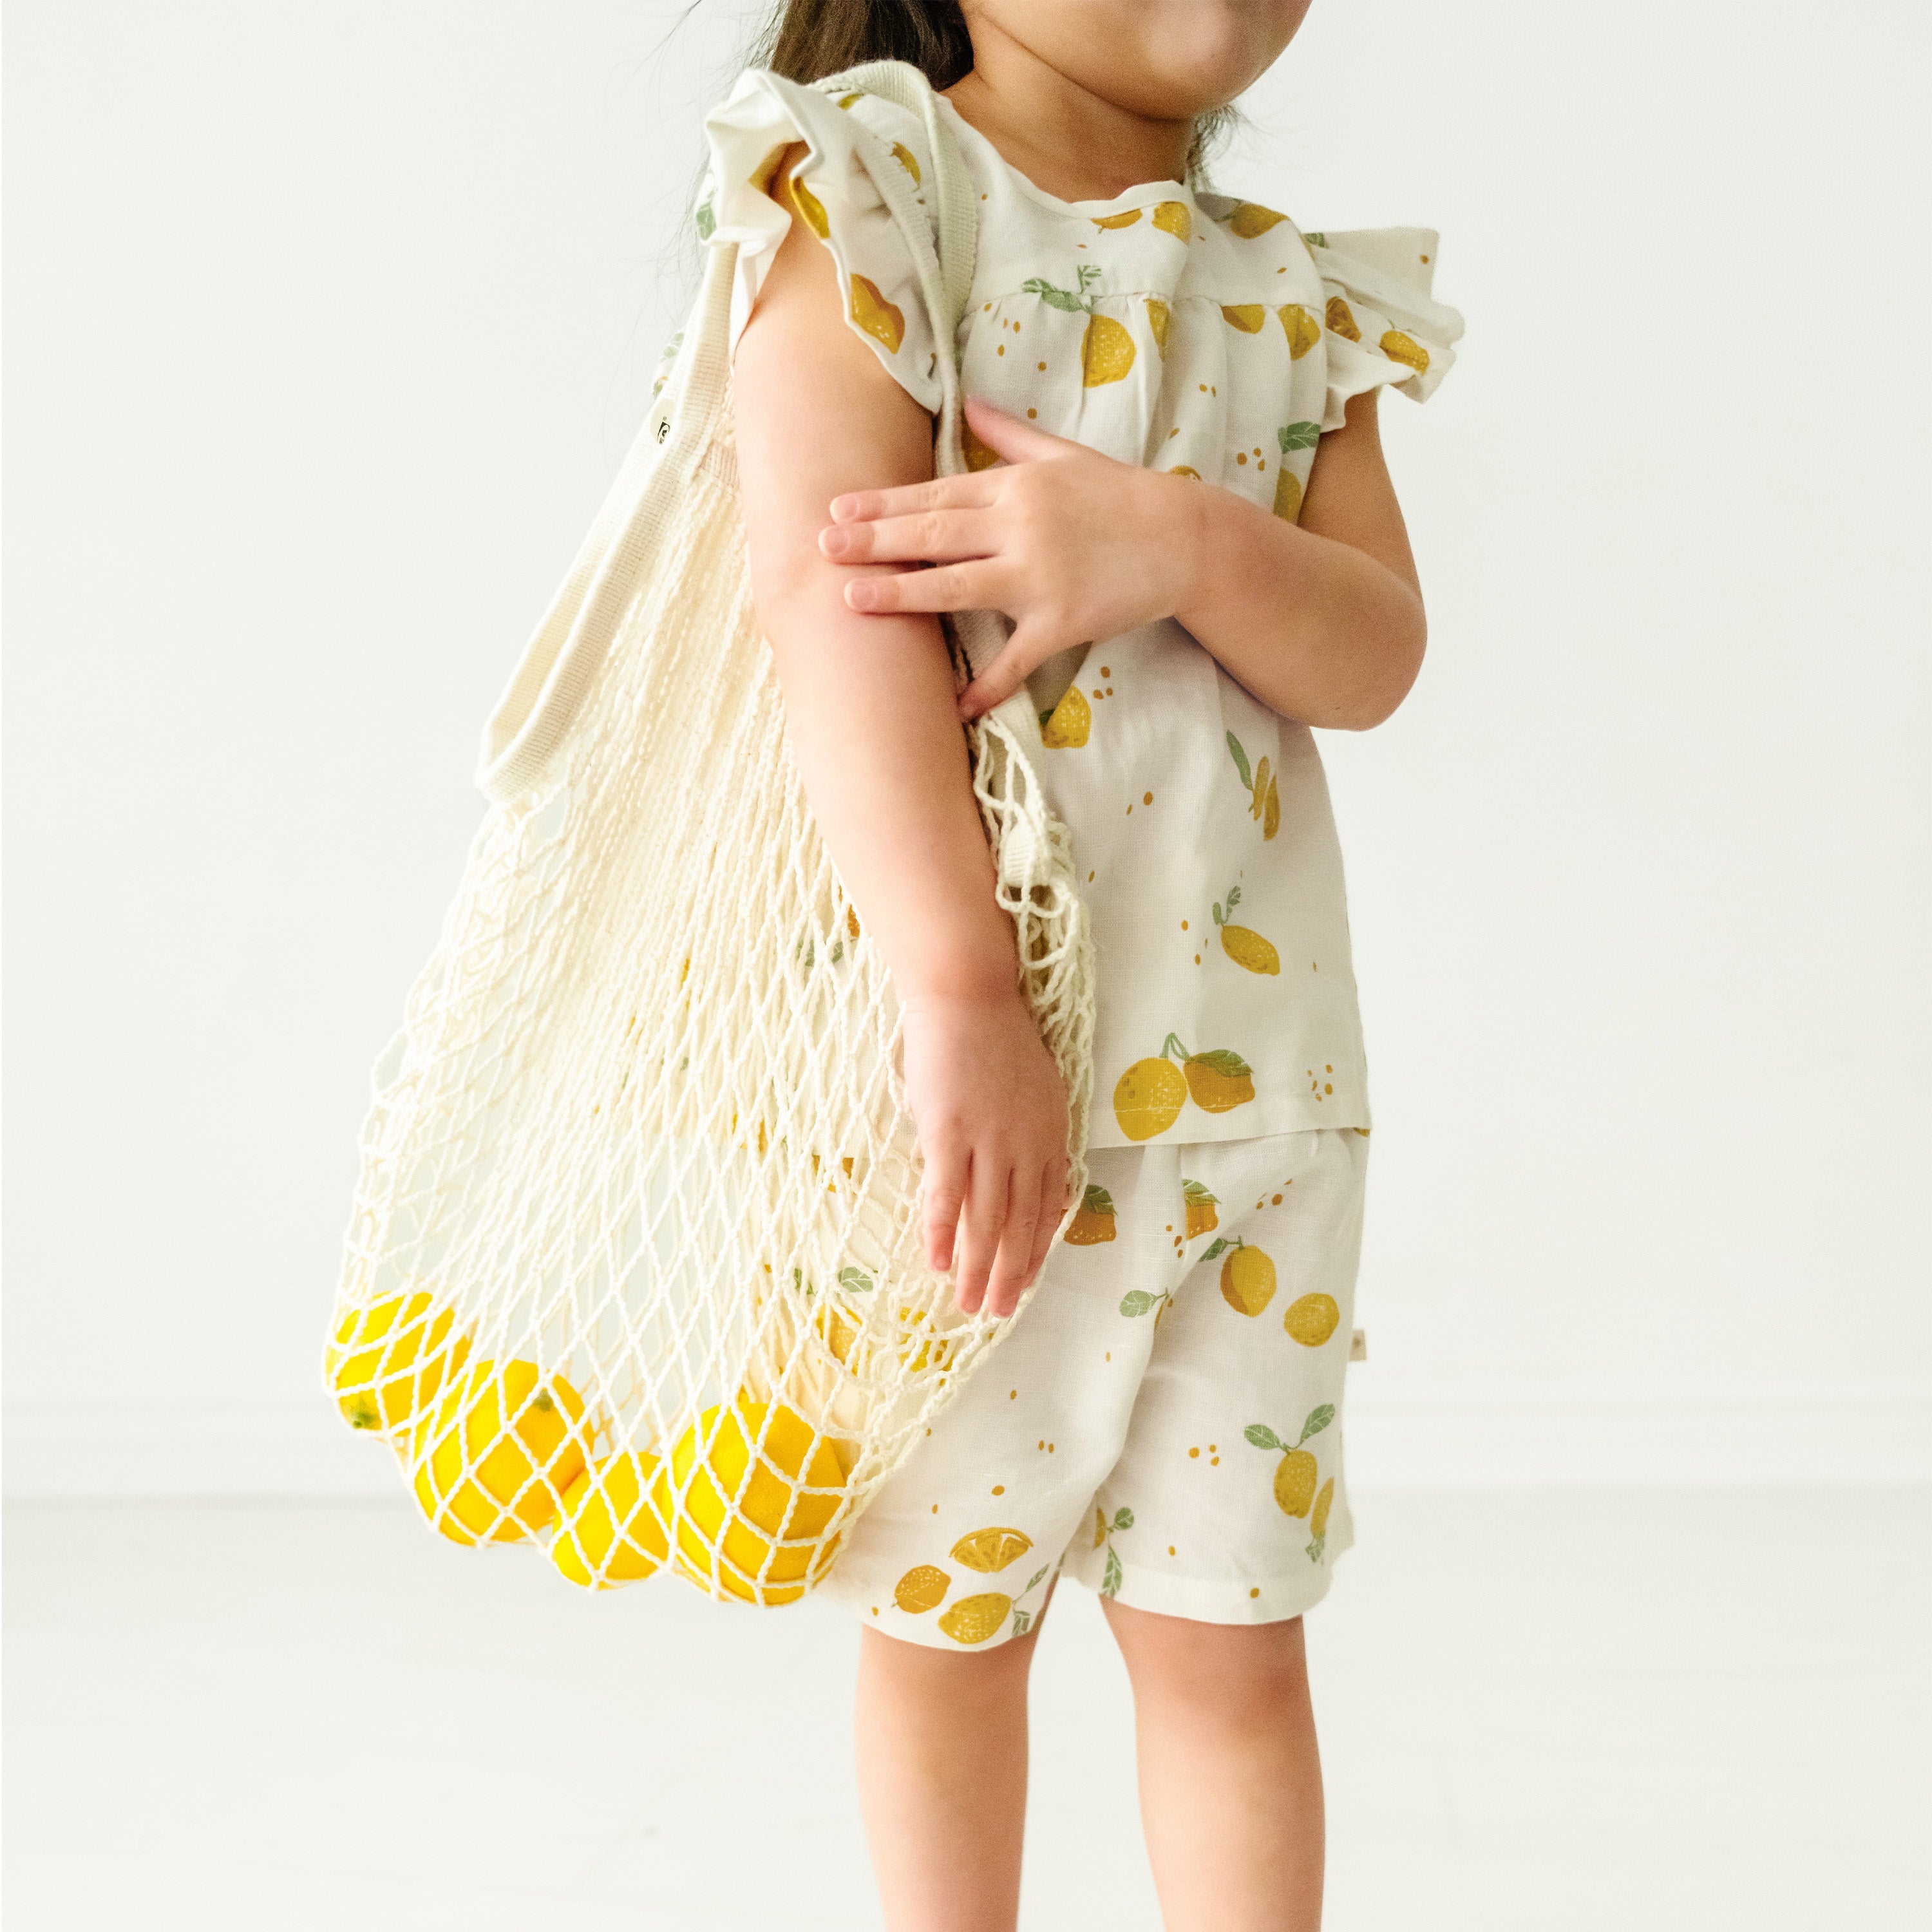 A young toddler in a Citron Organic Linen Flutter Top and Shorts from Makemake Organics holds a mesh bag full of lemons, standing against a plain background. The focus is on the bag and the toddler's arm.